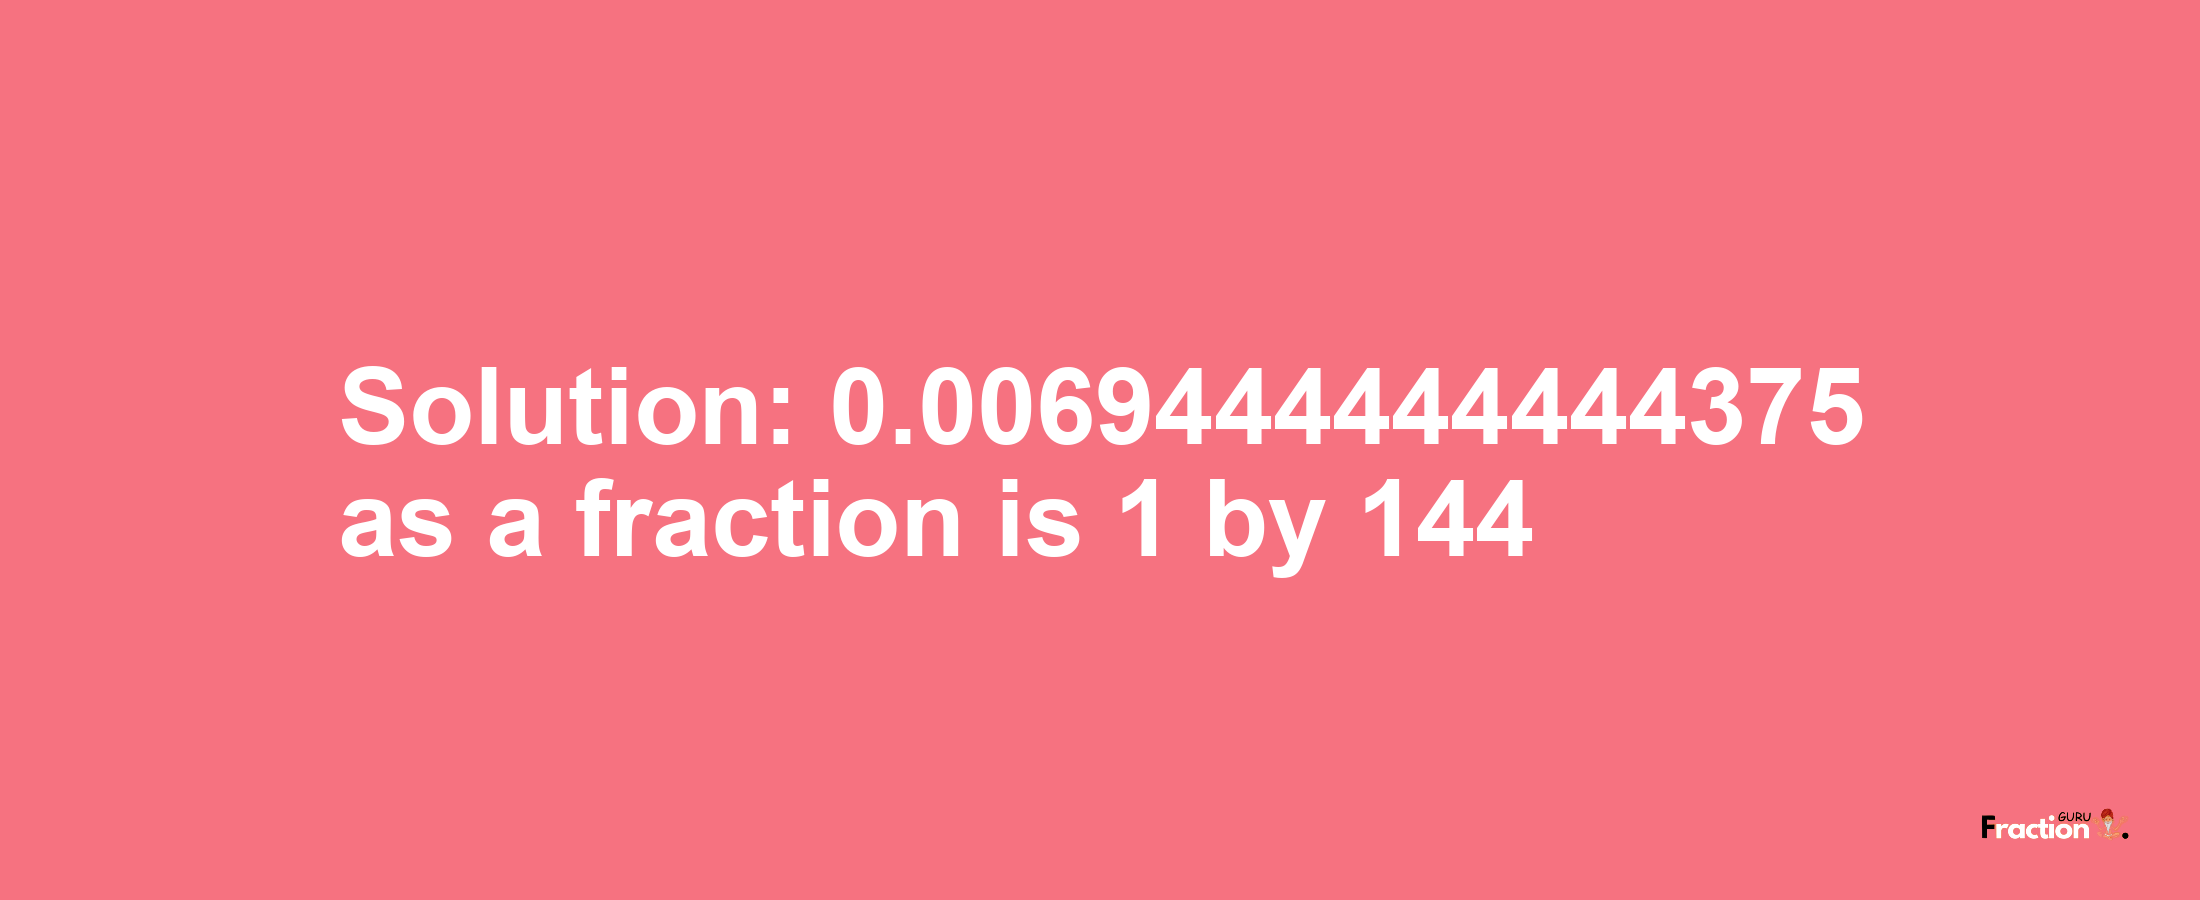 Solution:0.0069444444444375 as a fraction is 1/144